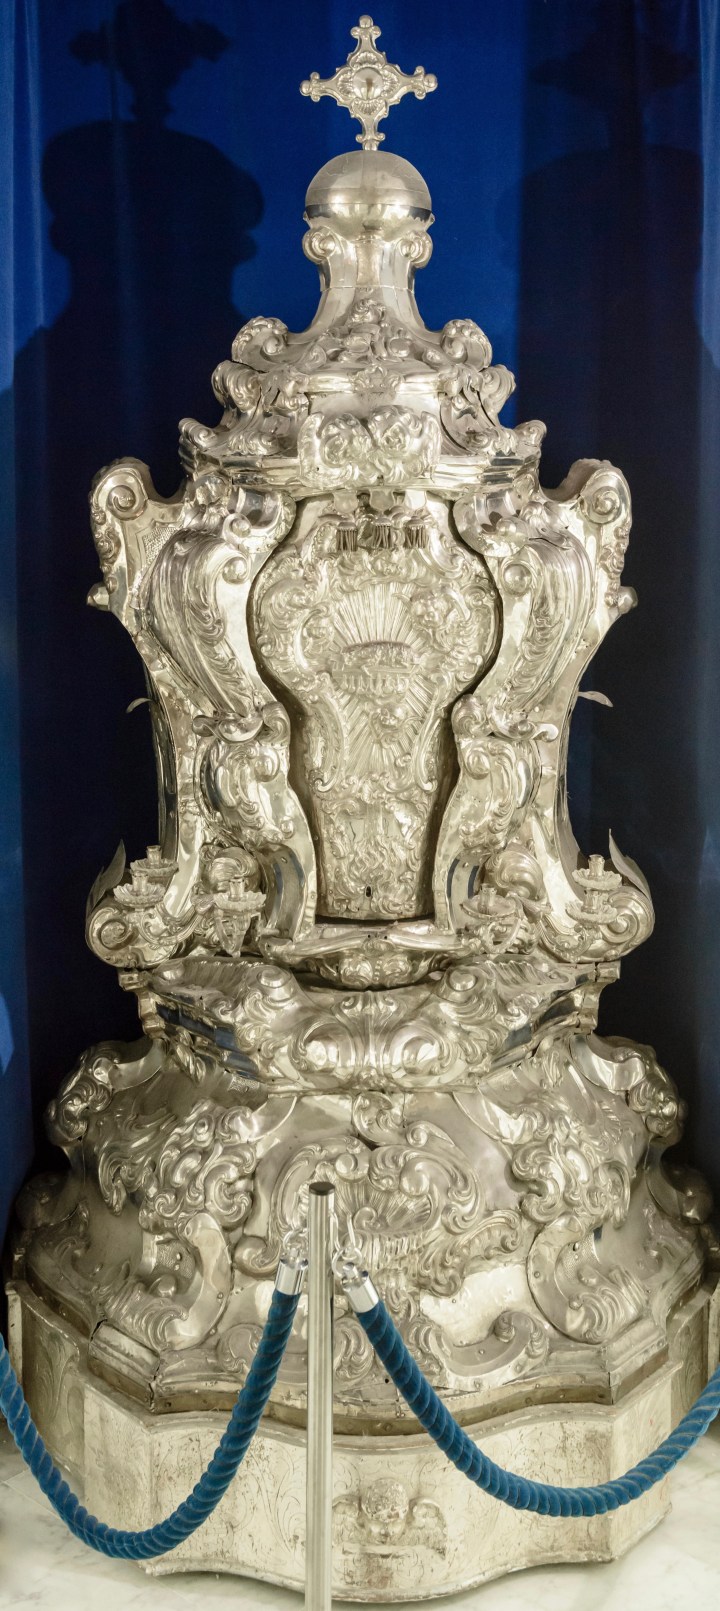 The-silver-collection-solid-silver-Throne-�-Alamy-KM10B6-cropped-from-original.jpg